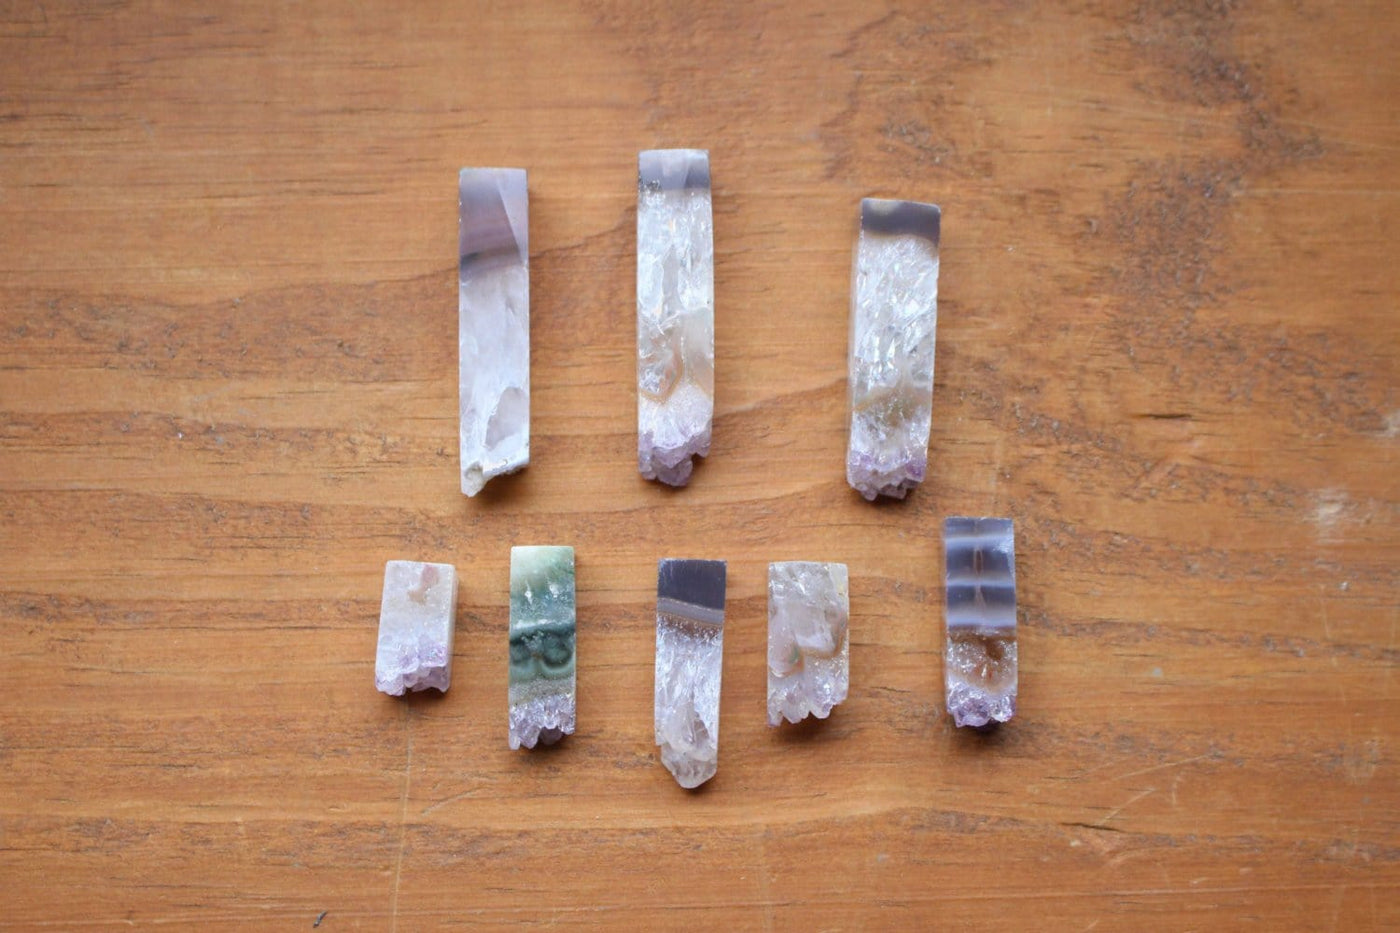 8 amethyst slices in different sizes on wooden background